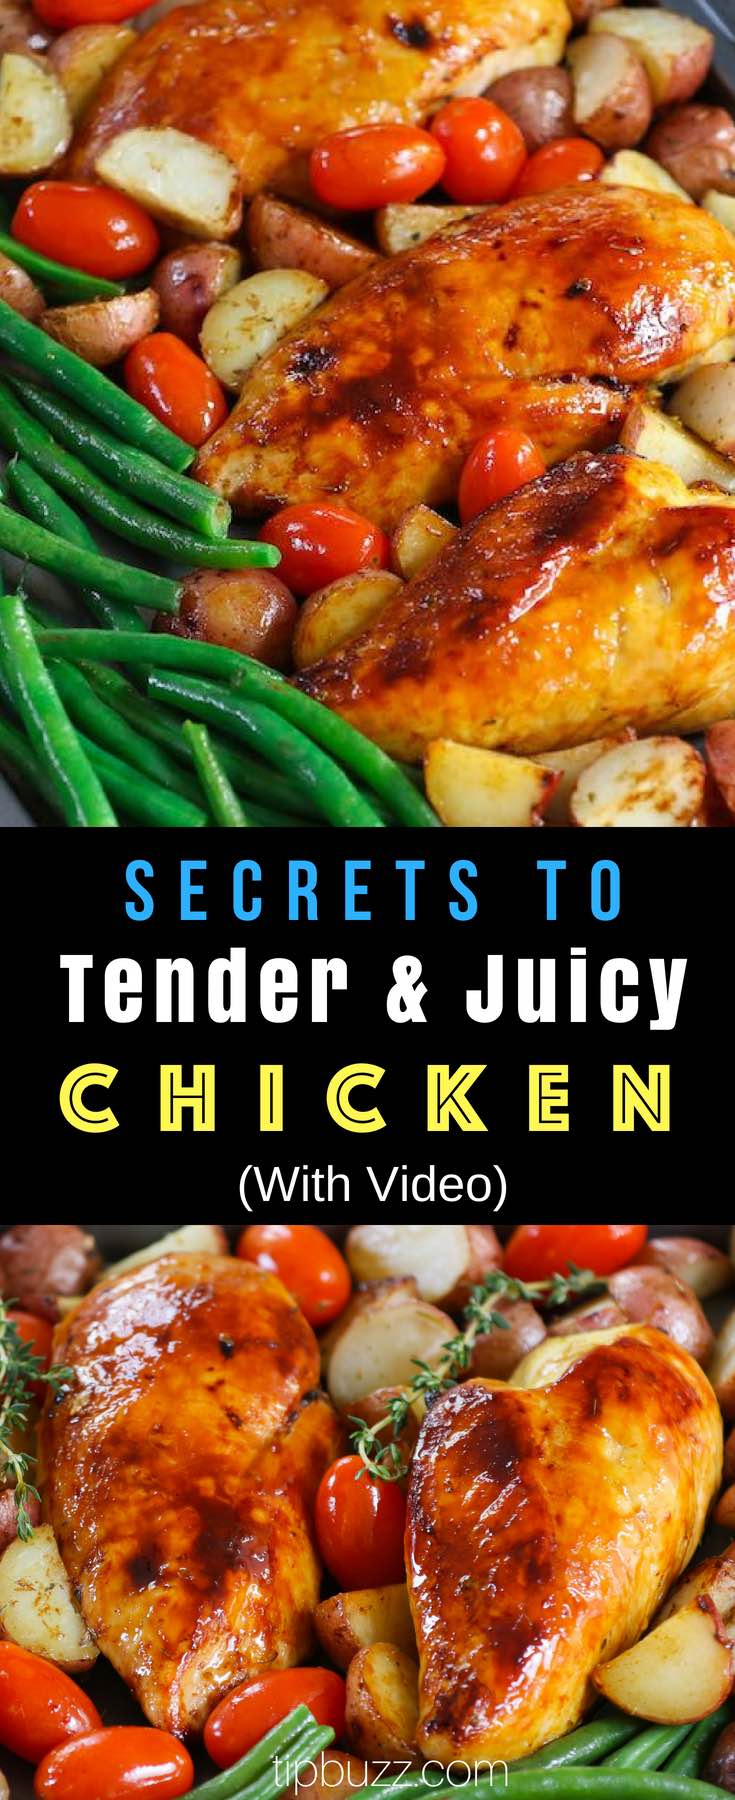 Learn How Long to Bake Chicken with tips and tricks for making the most flavorful, tender and juicy baked chicken. If cooked too long, chicken will turn out dry and tasteless while posing the risk of bacterial contamination. Here we show you how to get the best results every time! #BakedChickenBreasts #HowToBakeChicken